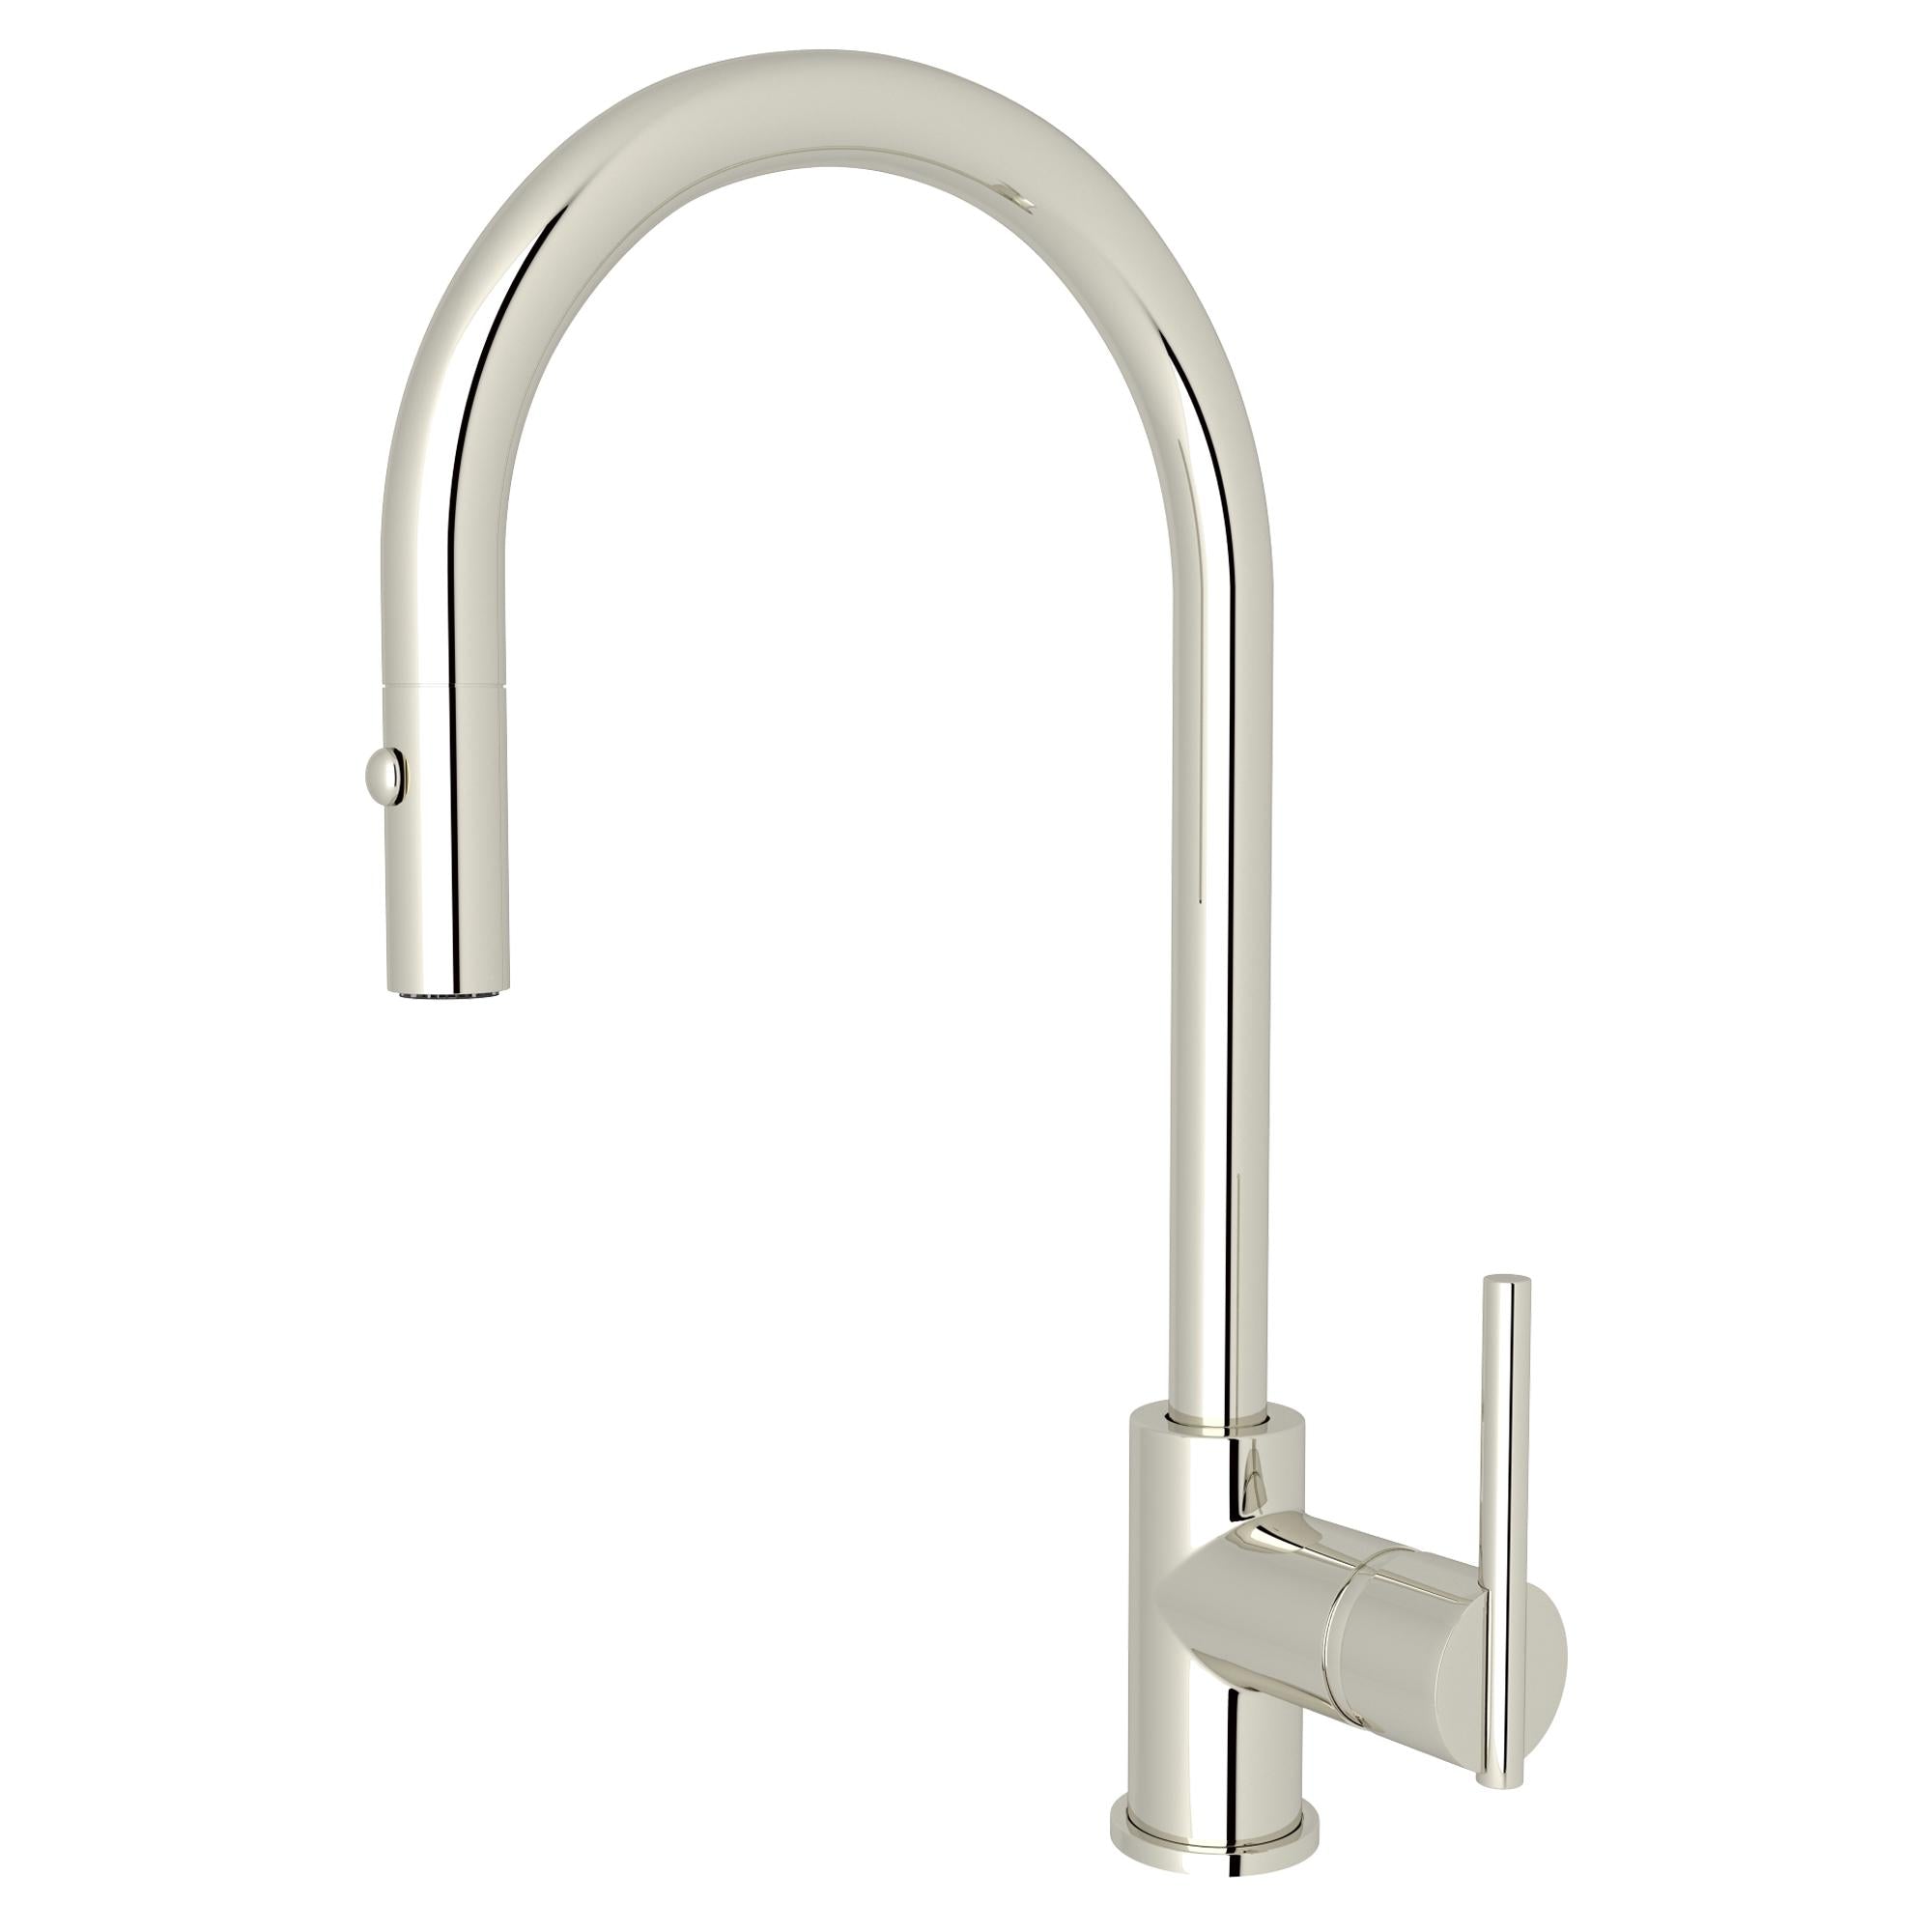 ROHL CY57 Pirellone Pull-Down Kitchen Faucet